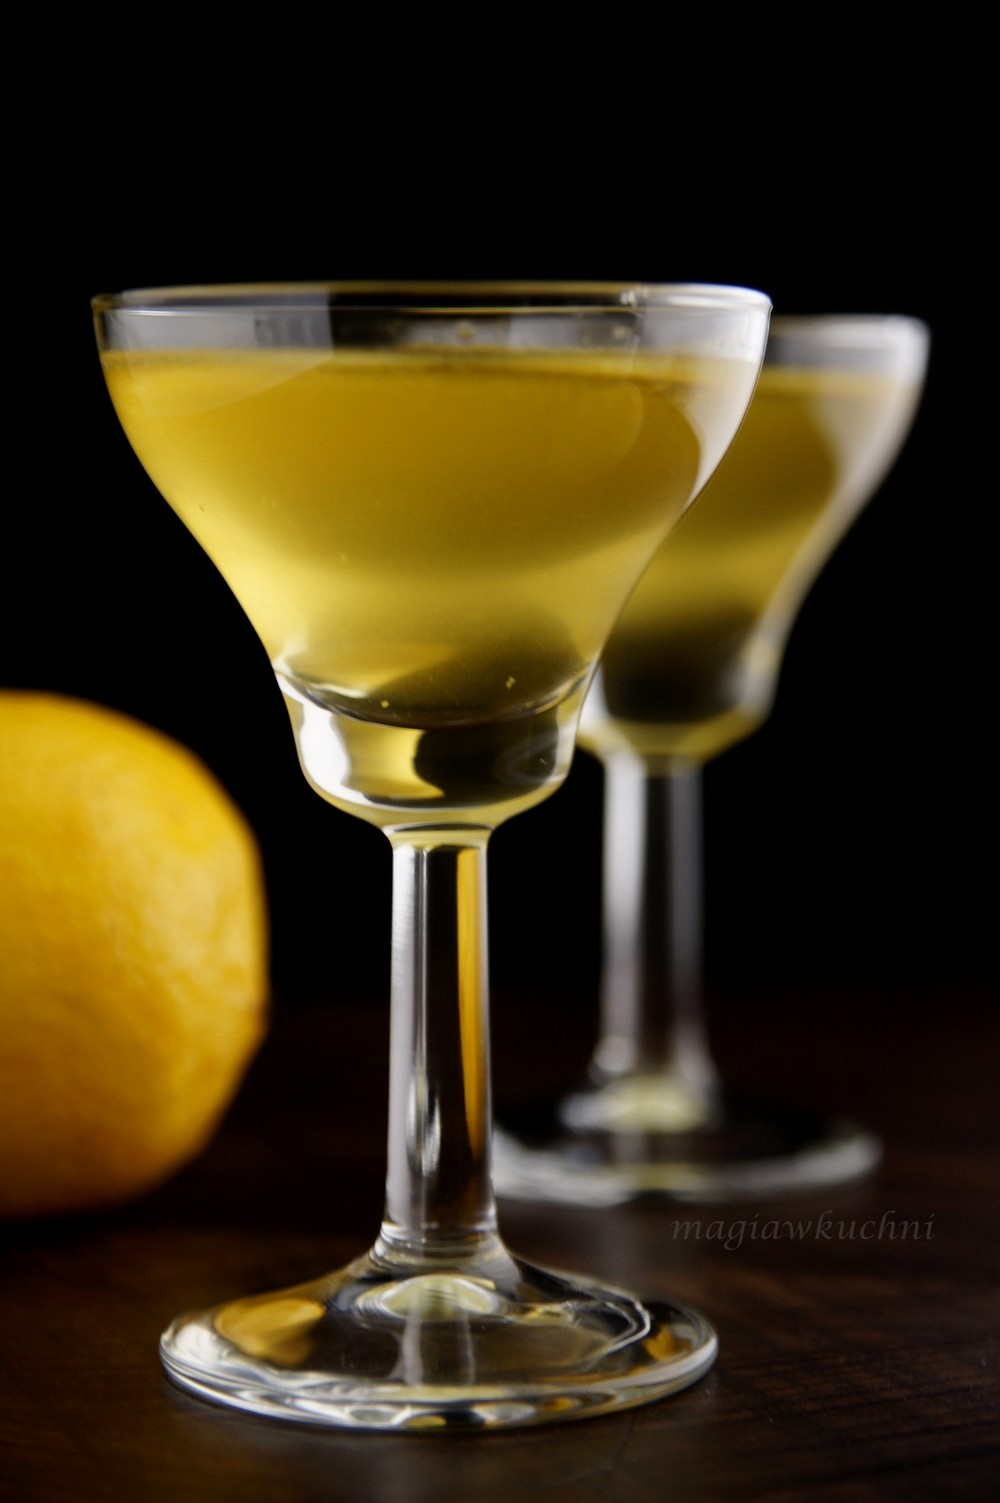 Limoncello – likier cytrynowy